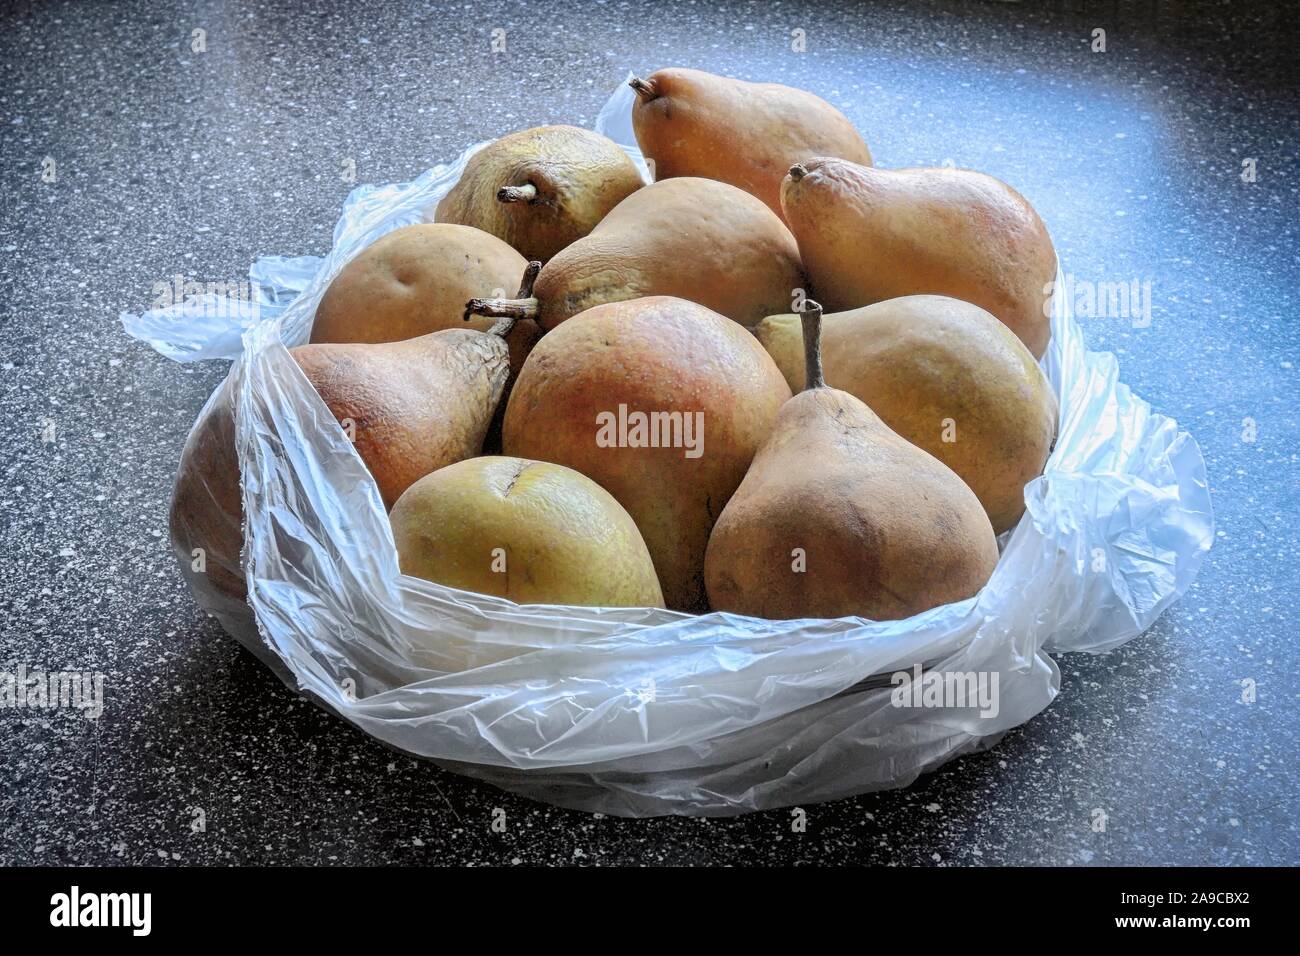 Wizened Doyenne du Comice pears wrapped in plastic in natural light on a granite background Stock Photo